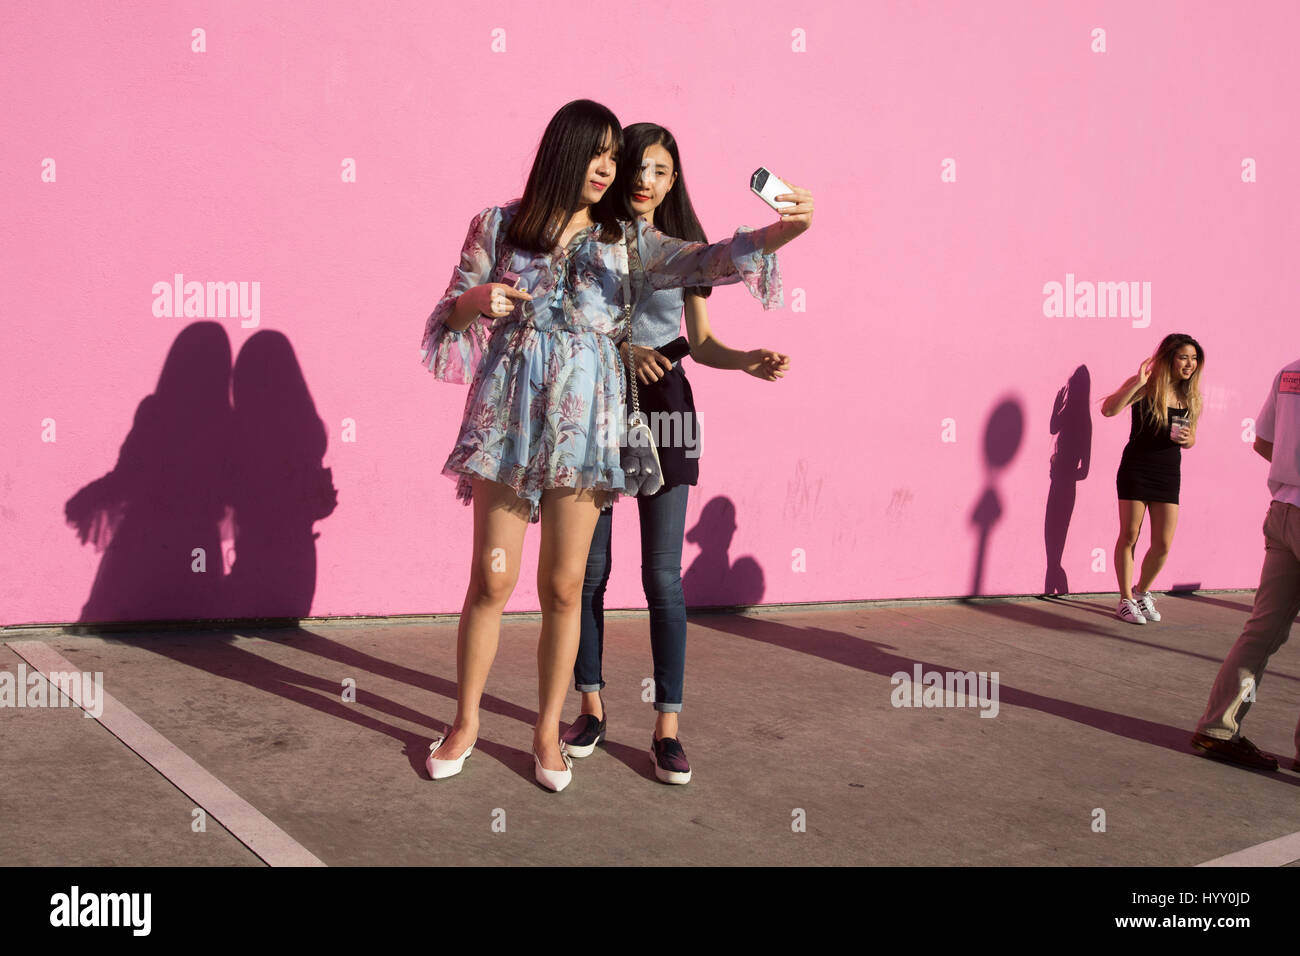 Tourists pose for photos at a wall by Paul Smith store on Melrose Avenue,  Los Angeles, California, USA Stock Photo - Alamy